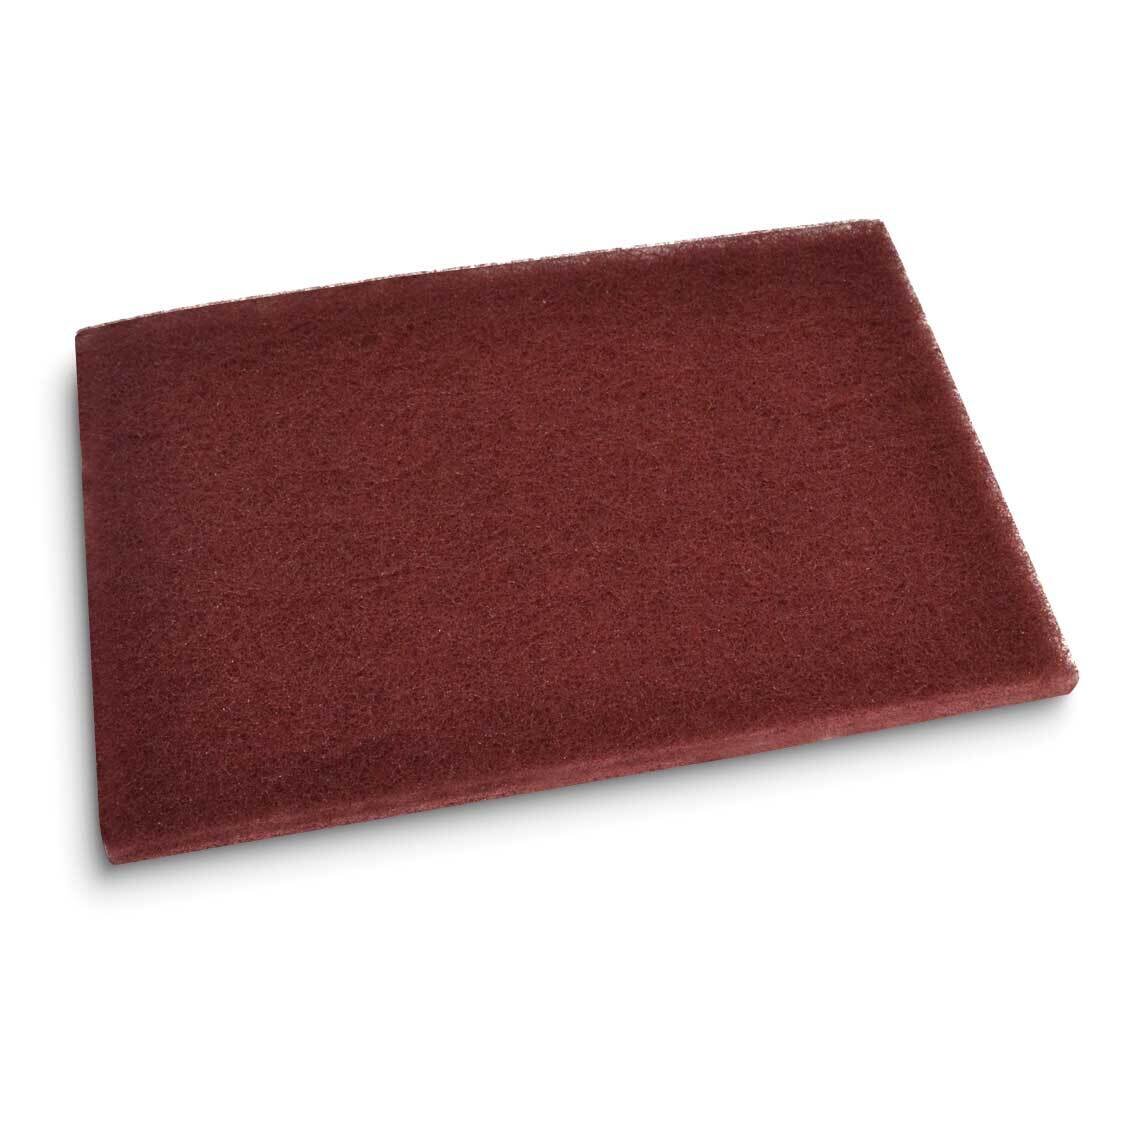 Pack of 5 Maroon Non-Abrasive Hand Pads JT5202